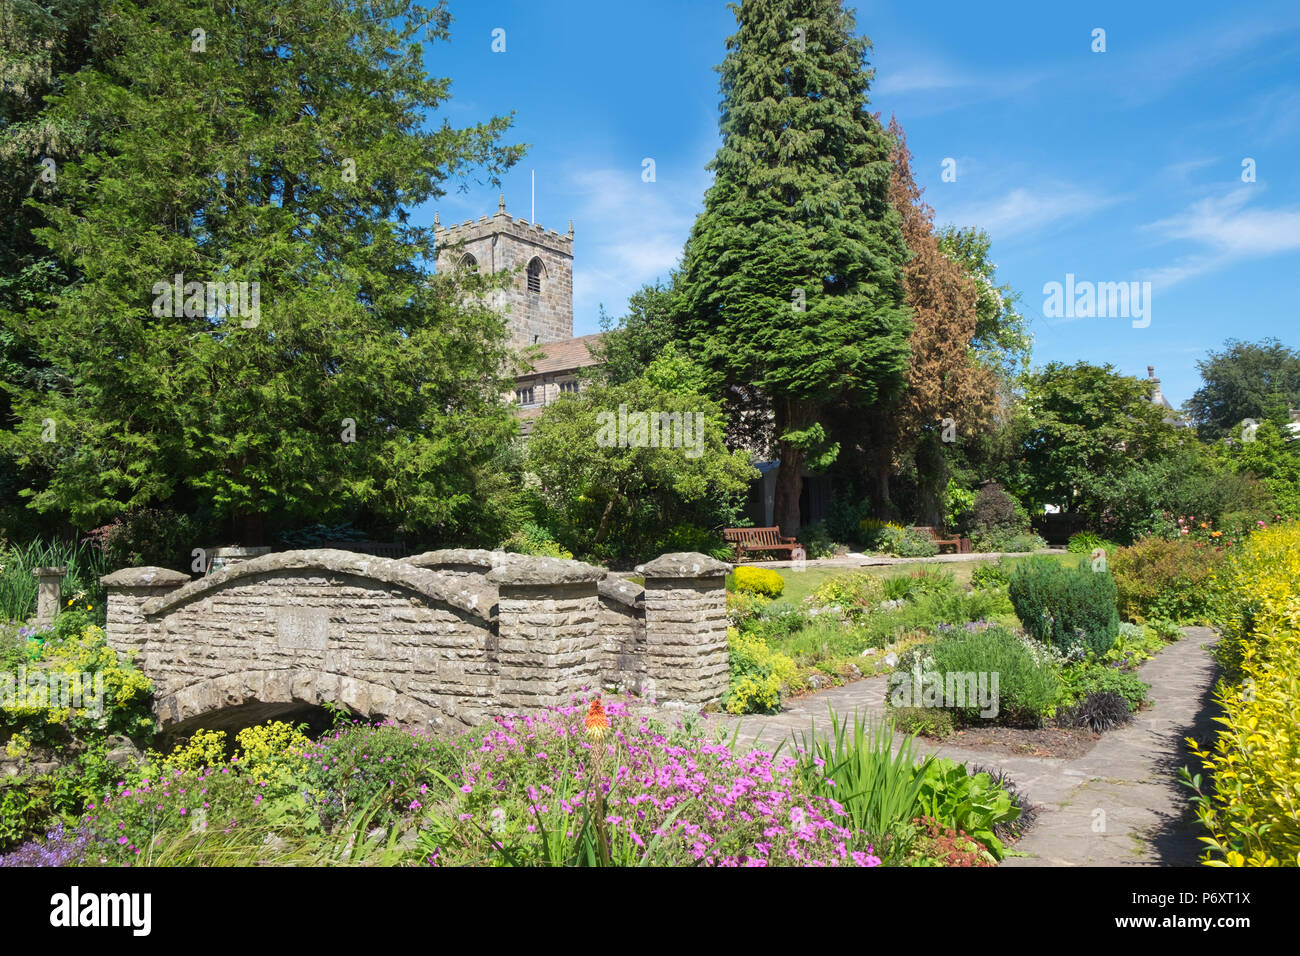 Waddington, Clitheroe, Lancashire, UK. Pretty gardens in the centre of the village with church tower in background. Stock Photo